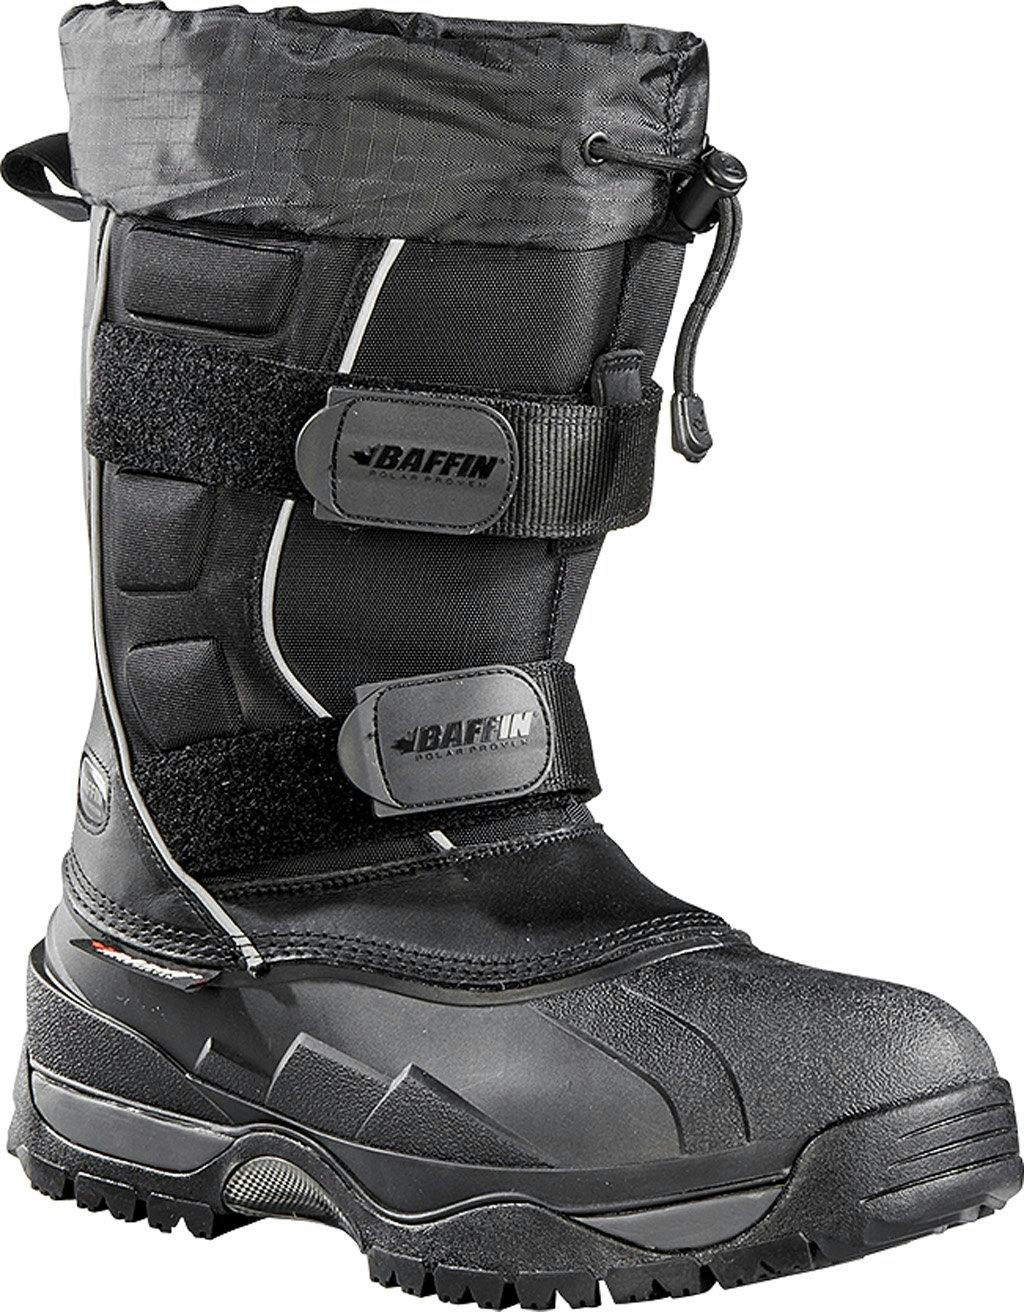 Product image for Eiger Boot - Men's